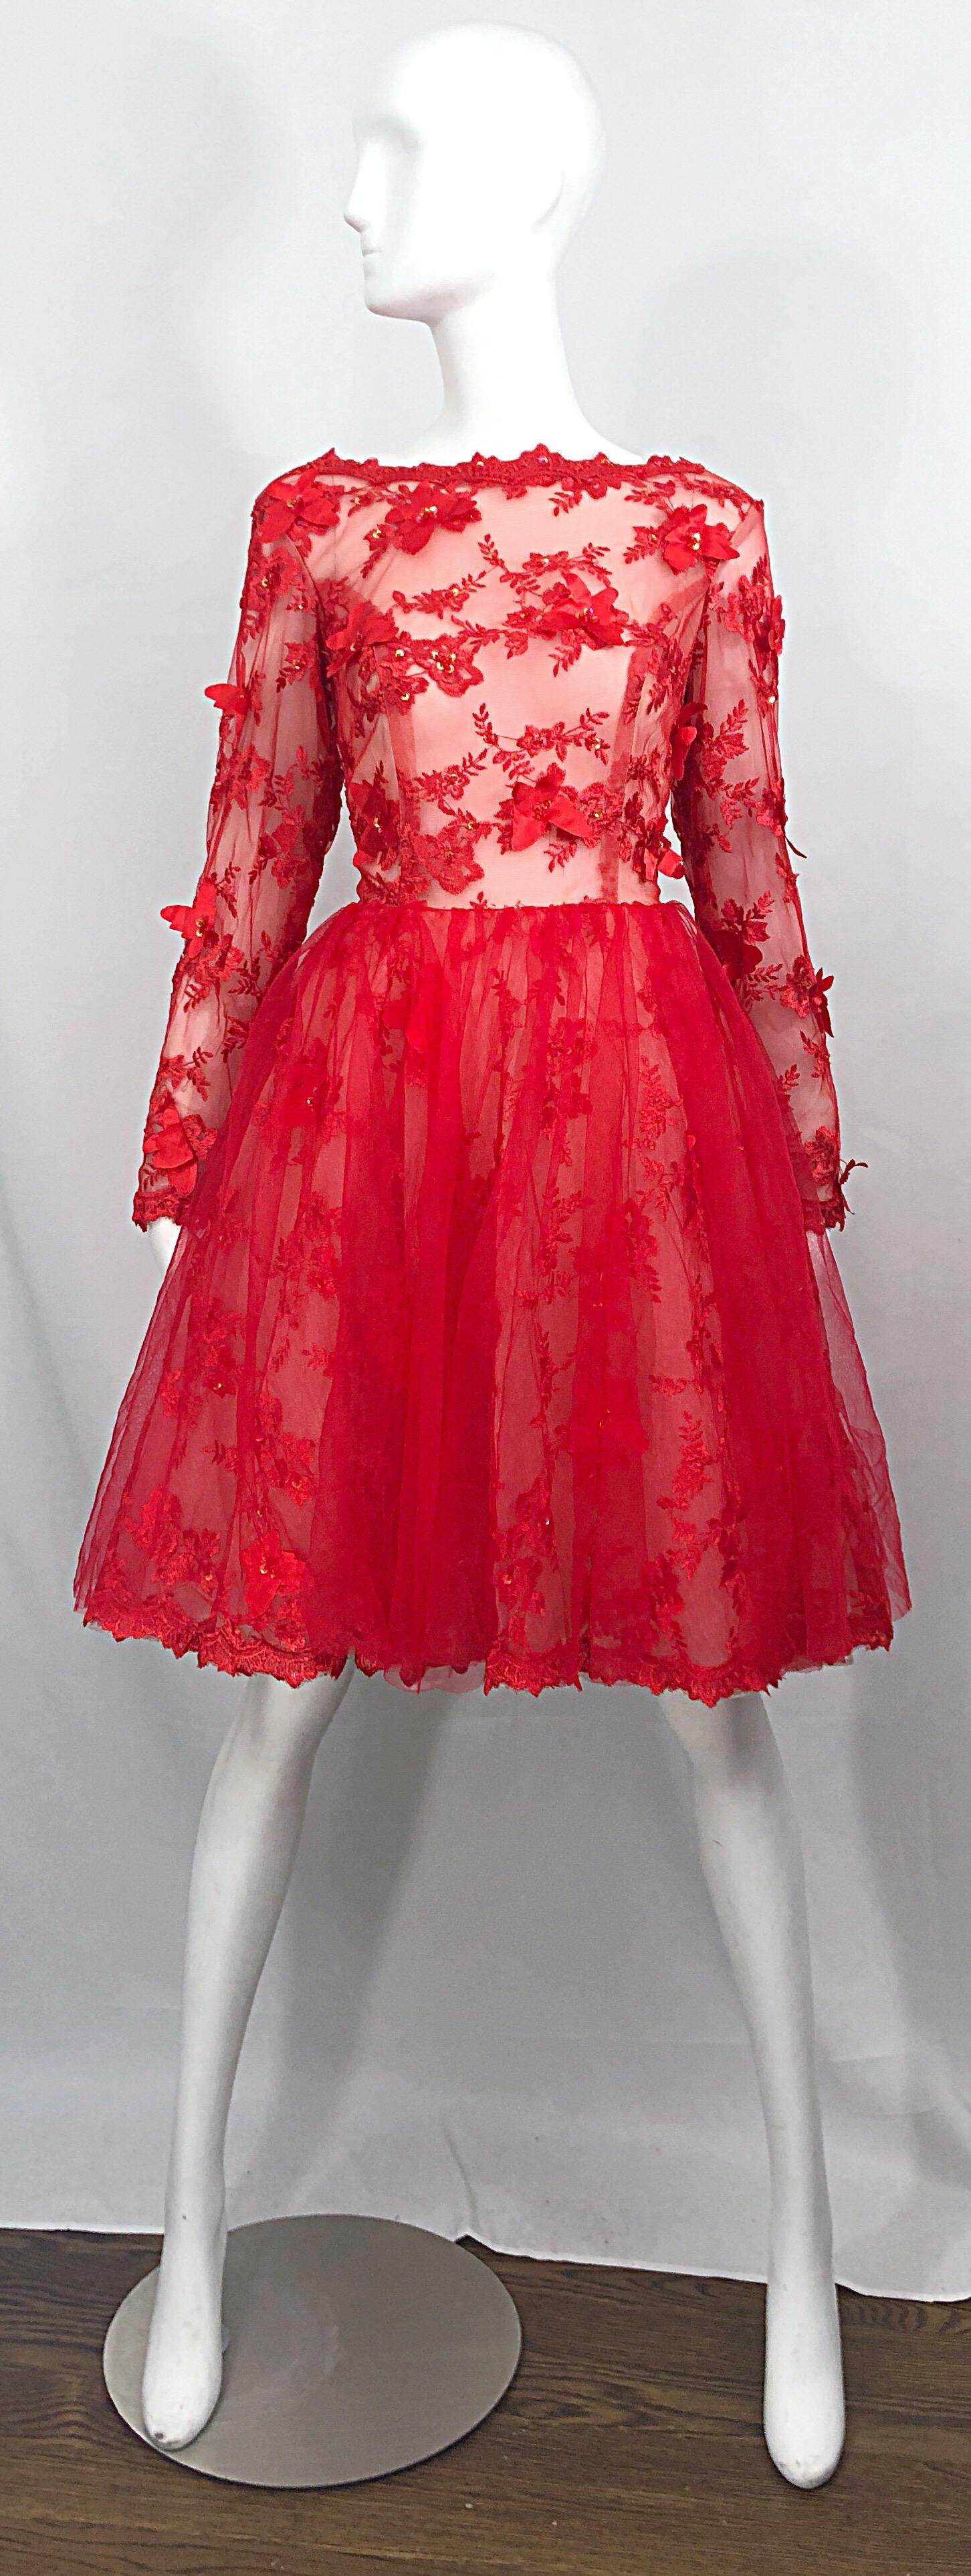 Sensational 90s does 50s couture quality Size 10 / 12 fit n' flare long sleeve cocktail dress. Features a semi sheer mesh bodice with red silk appliqués with rhinestones throughout. Forgiving full skirt features a mesh overlay with red lace